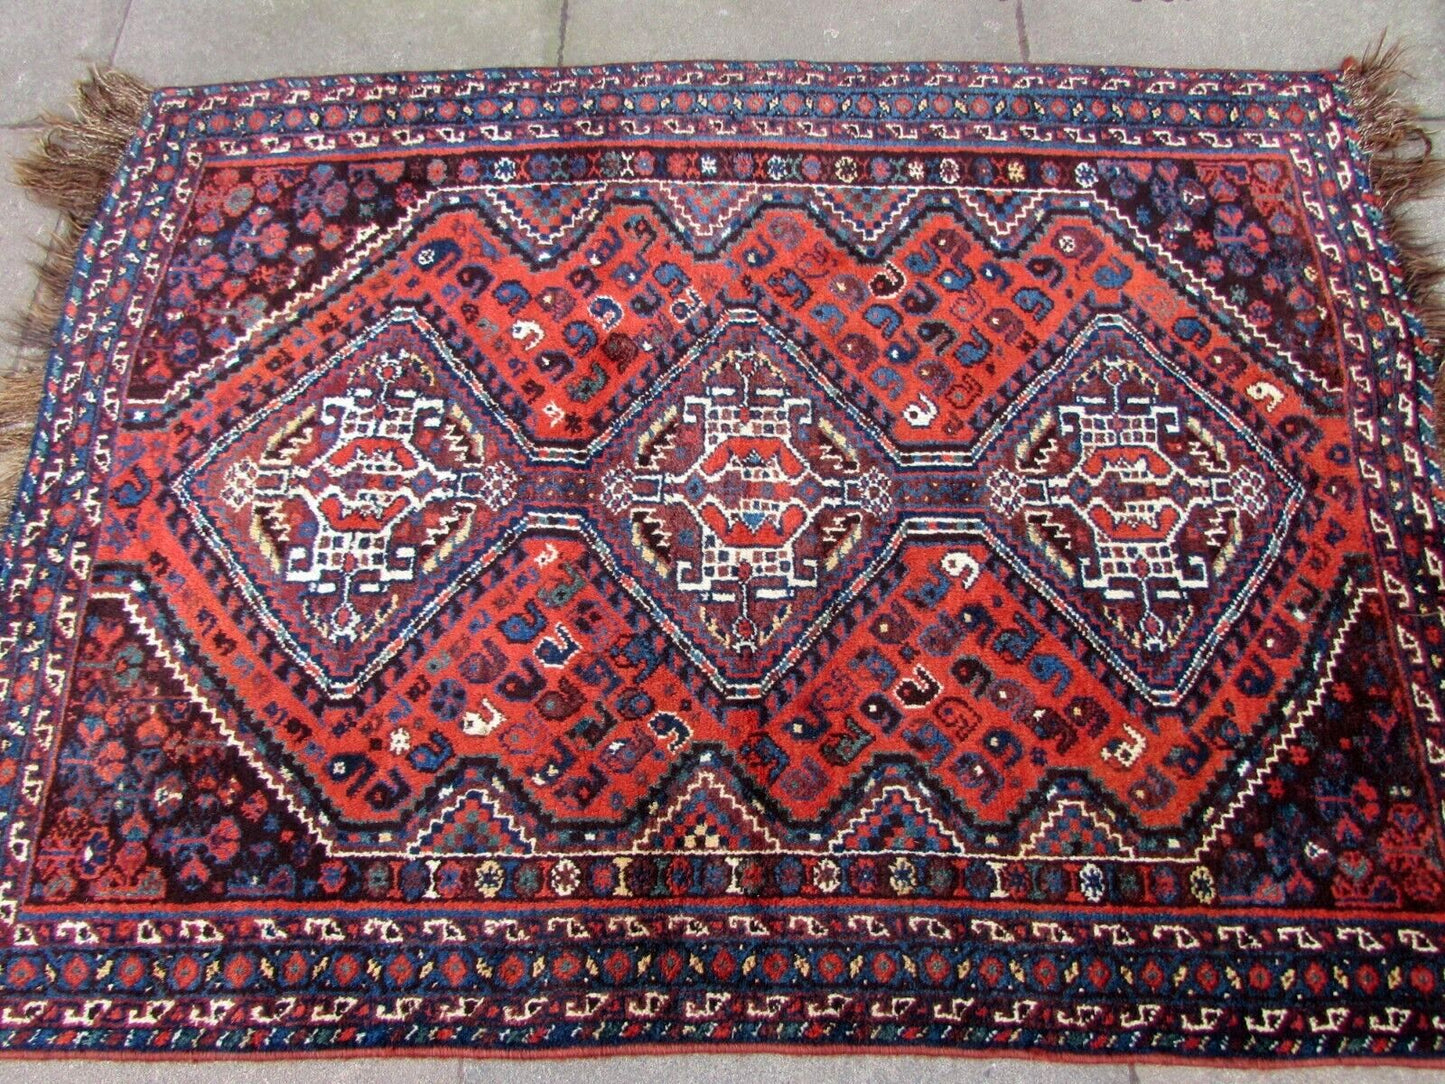 Handmade antique Persian Shiraz rug in traditional medallion design. The rug is from the beginning of 20th century in original good condition.